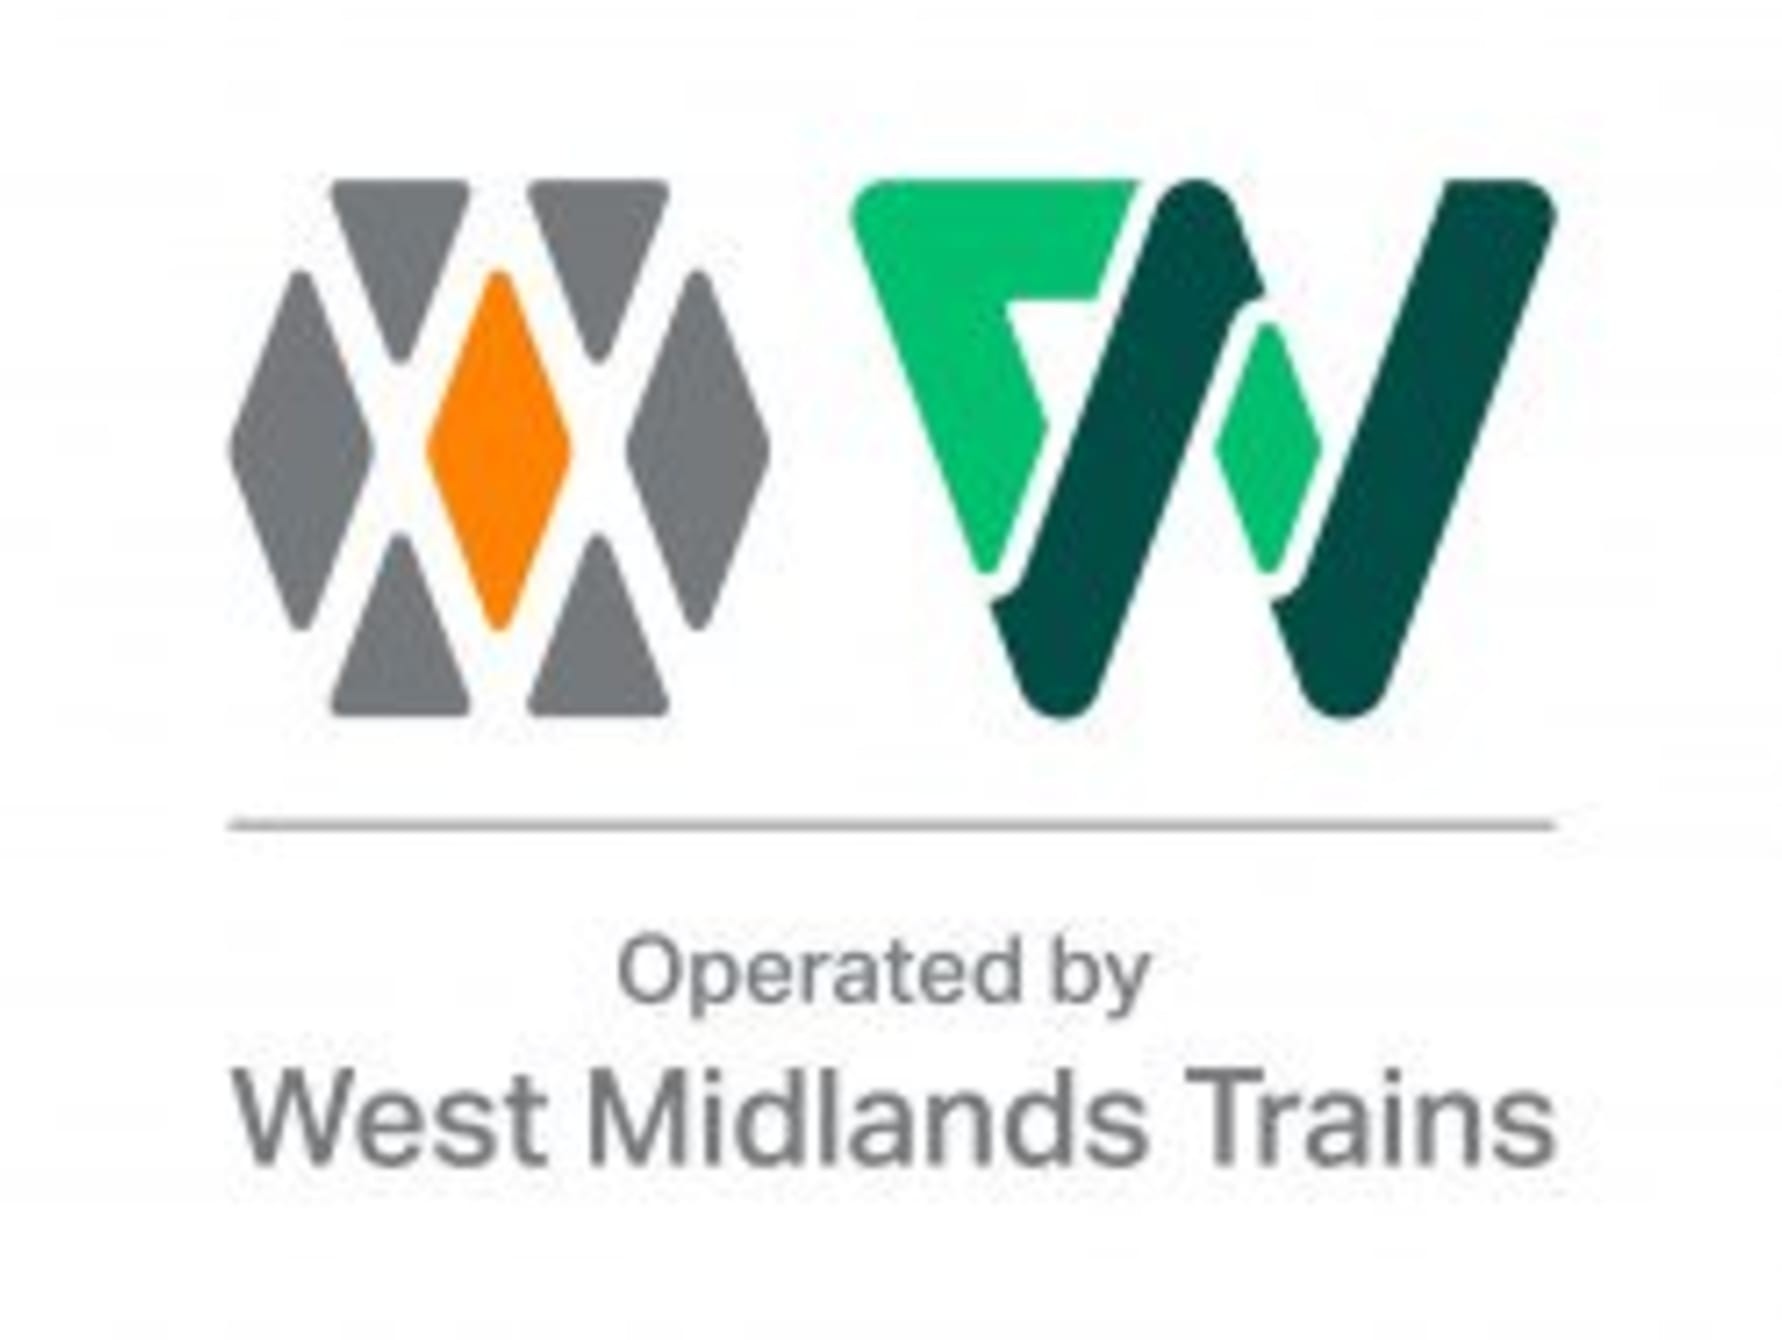 West Midlands Trains Finalises £680m Deal For New Trains With Bombardier and CAF